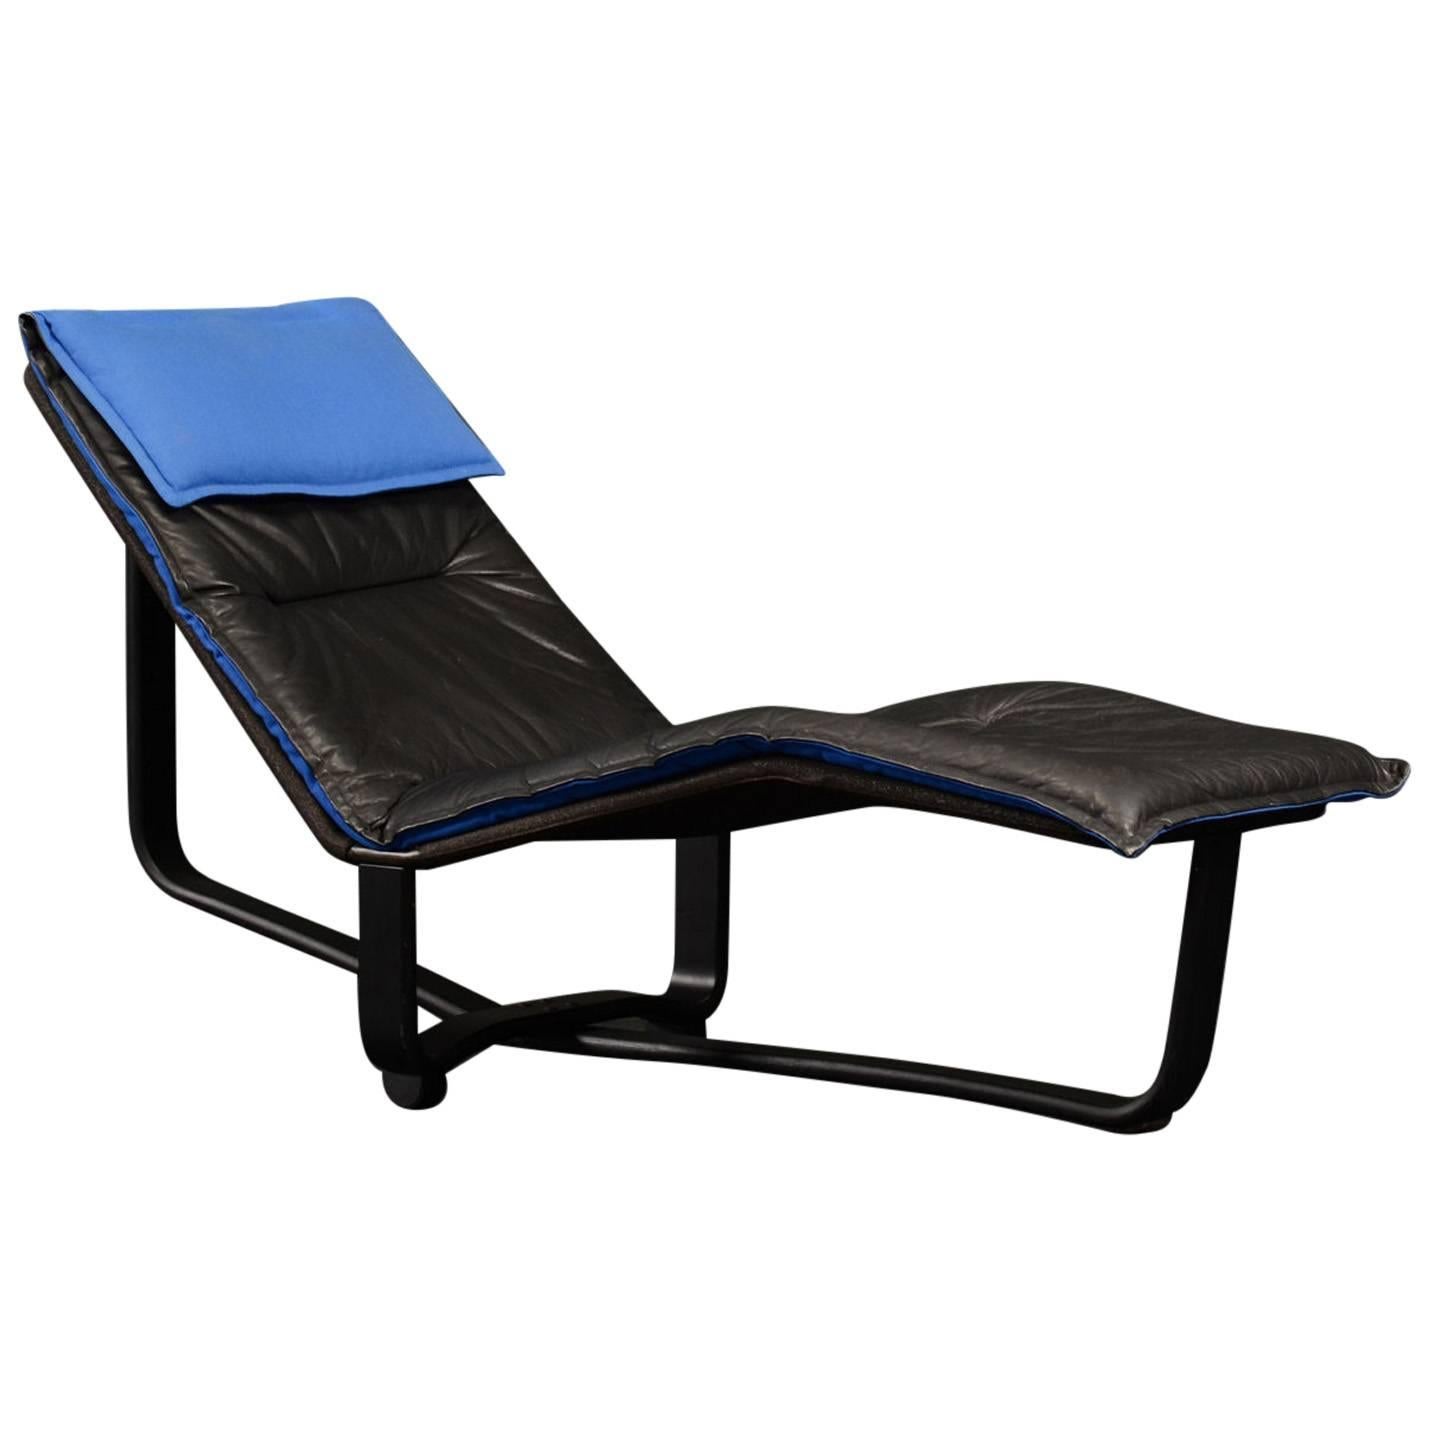 Igmar & Knut Relling "Rest" Lounge Chair For Sale